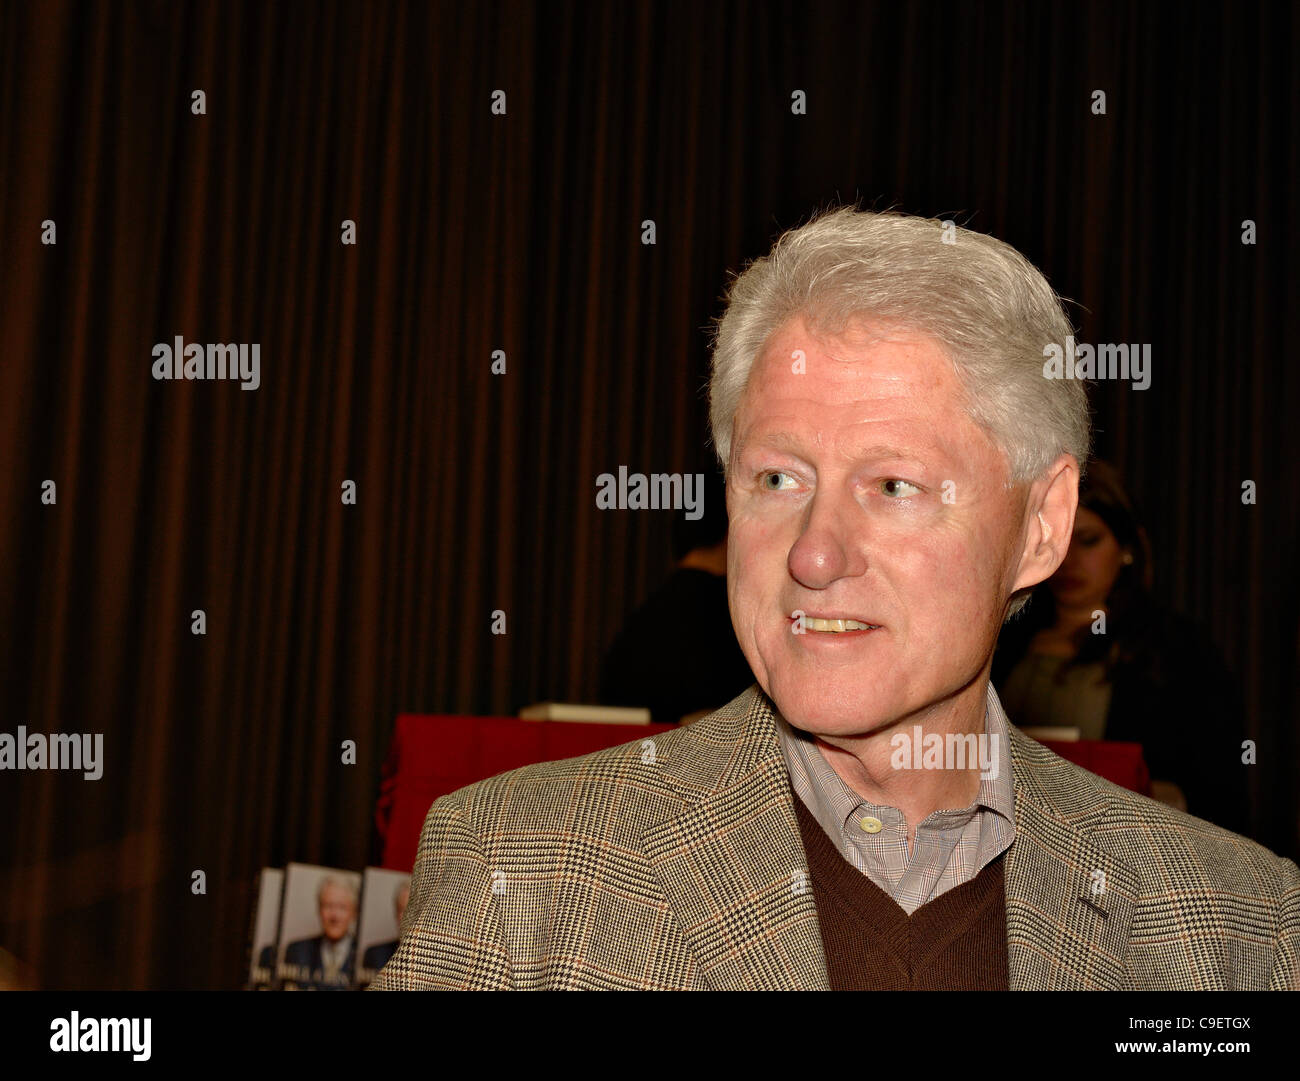 Portrait of smiling President Bill Clinton taken during his book signing at the Chappaqua Library in his hometown of Chappaqua, New York on December 9, 2011. More than 500 people attended the book signing. Stock Photo